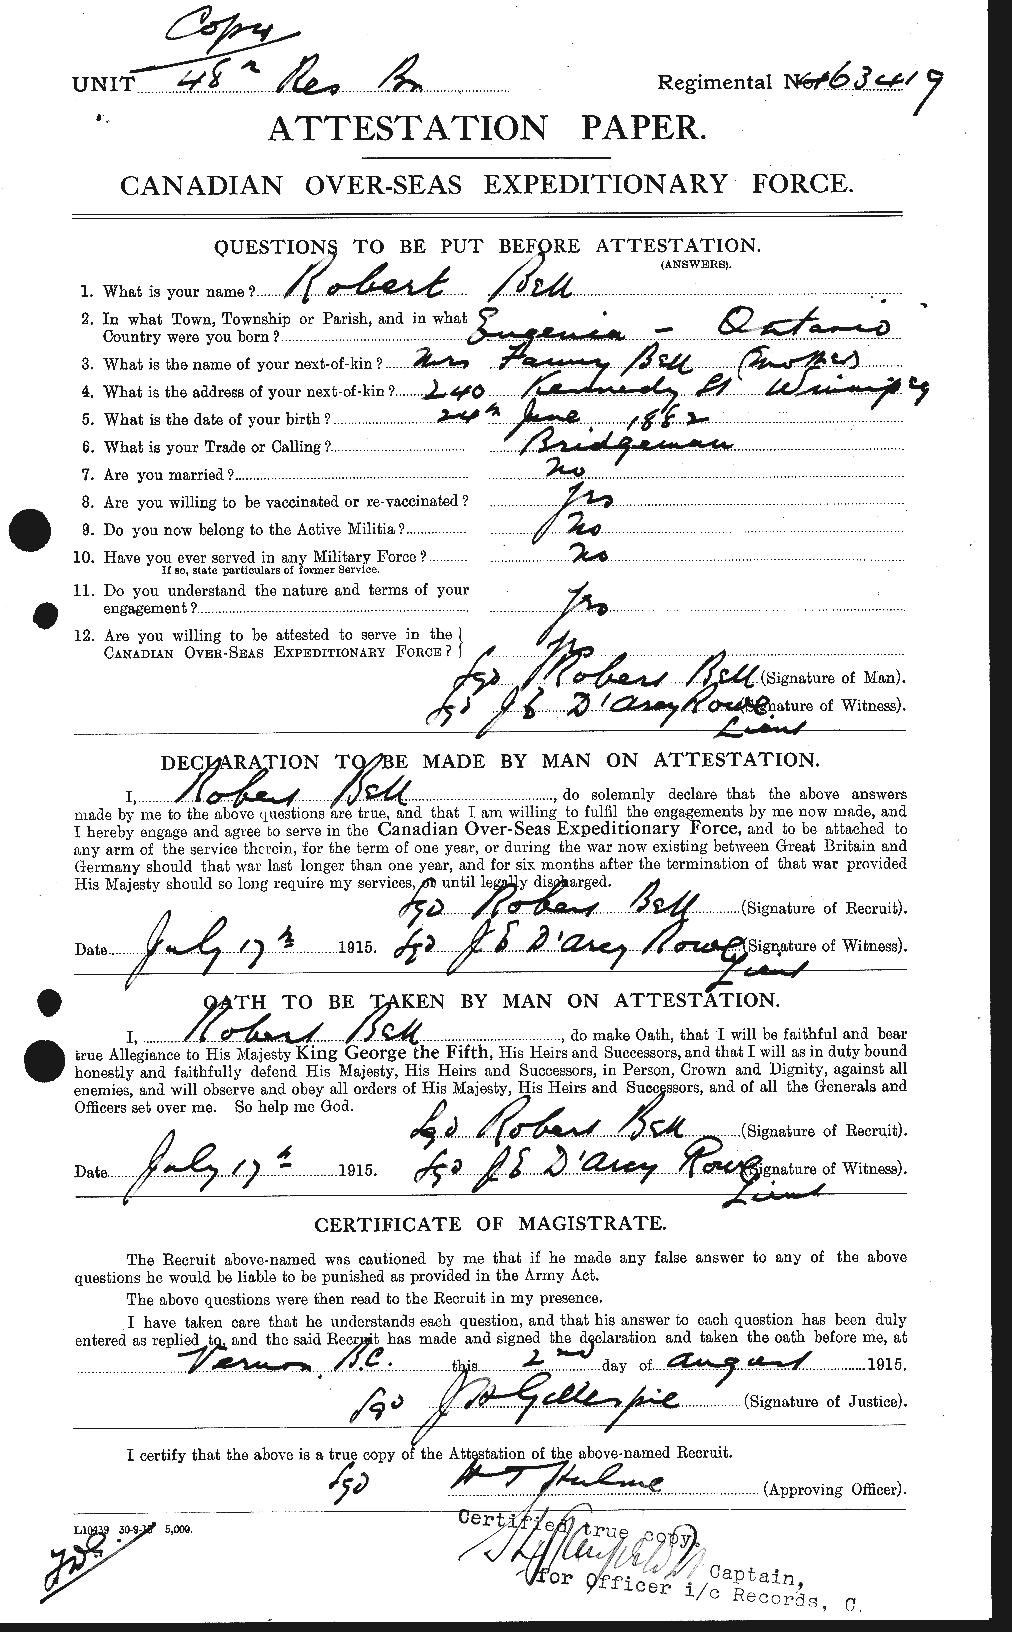 Personnel Records of the First World War - CEF 234644a